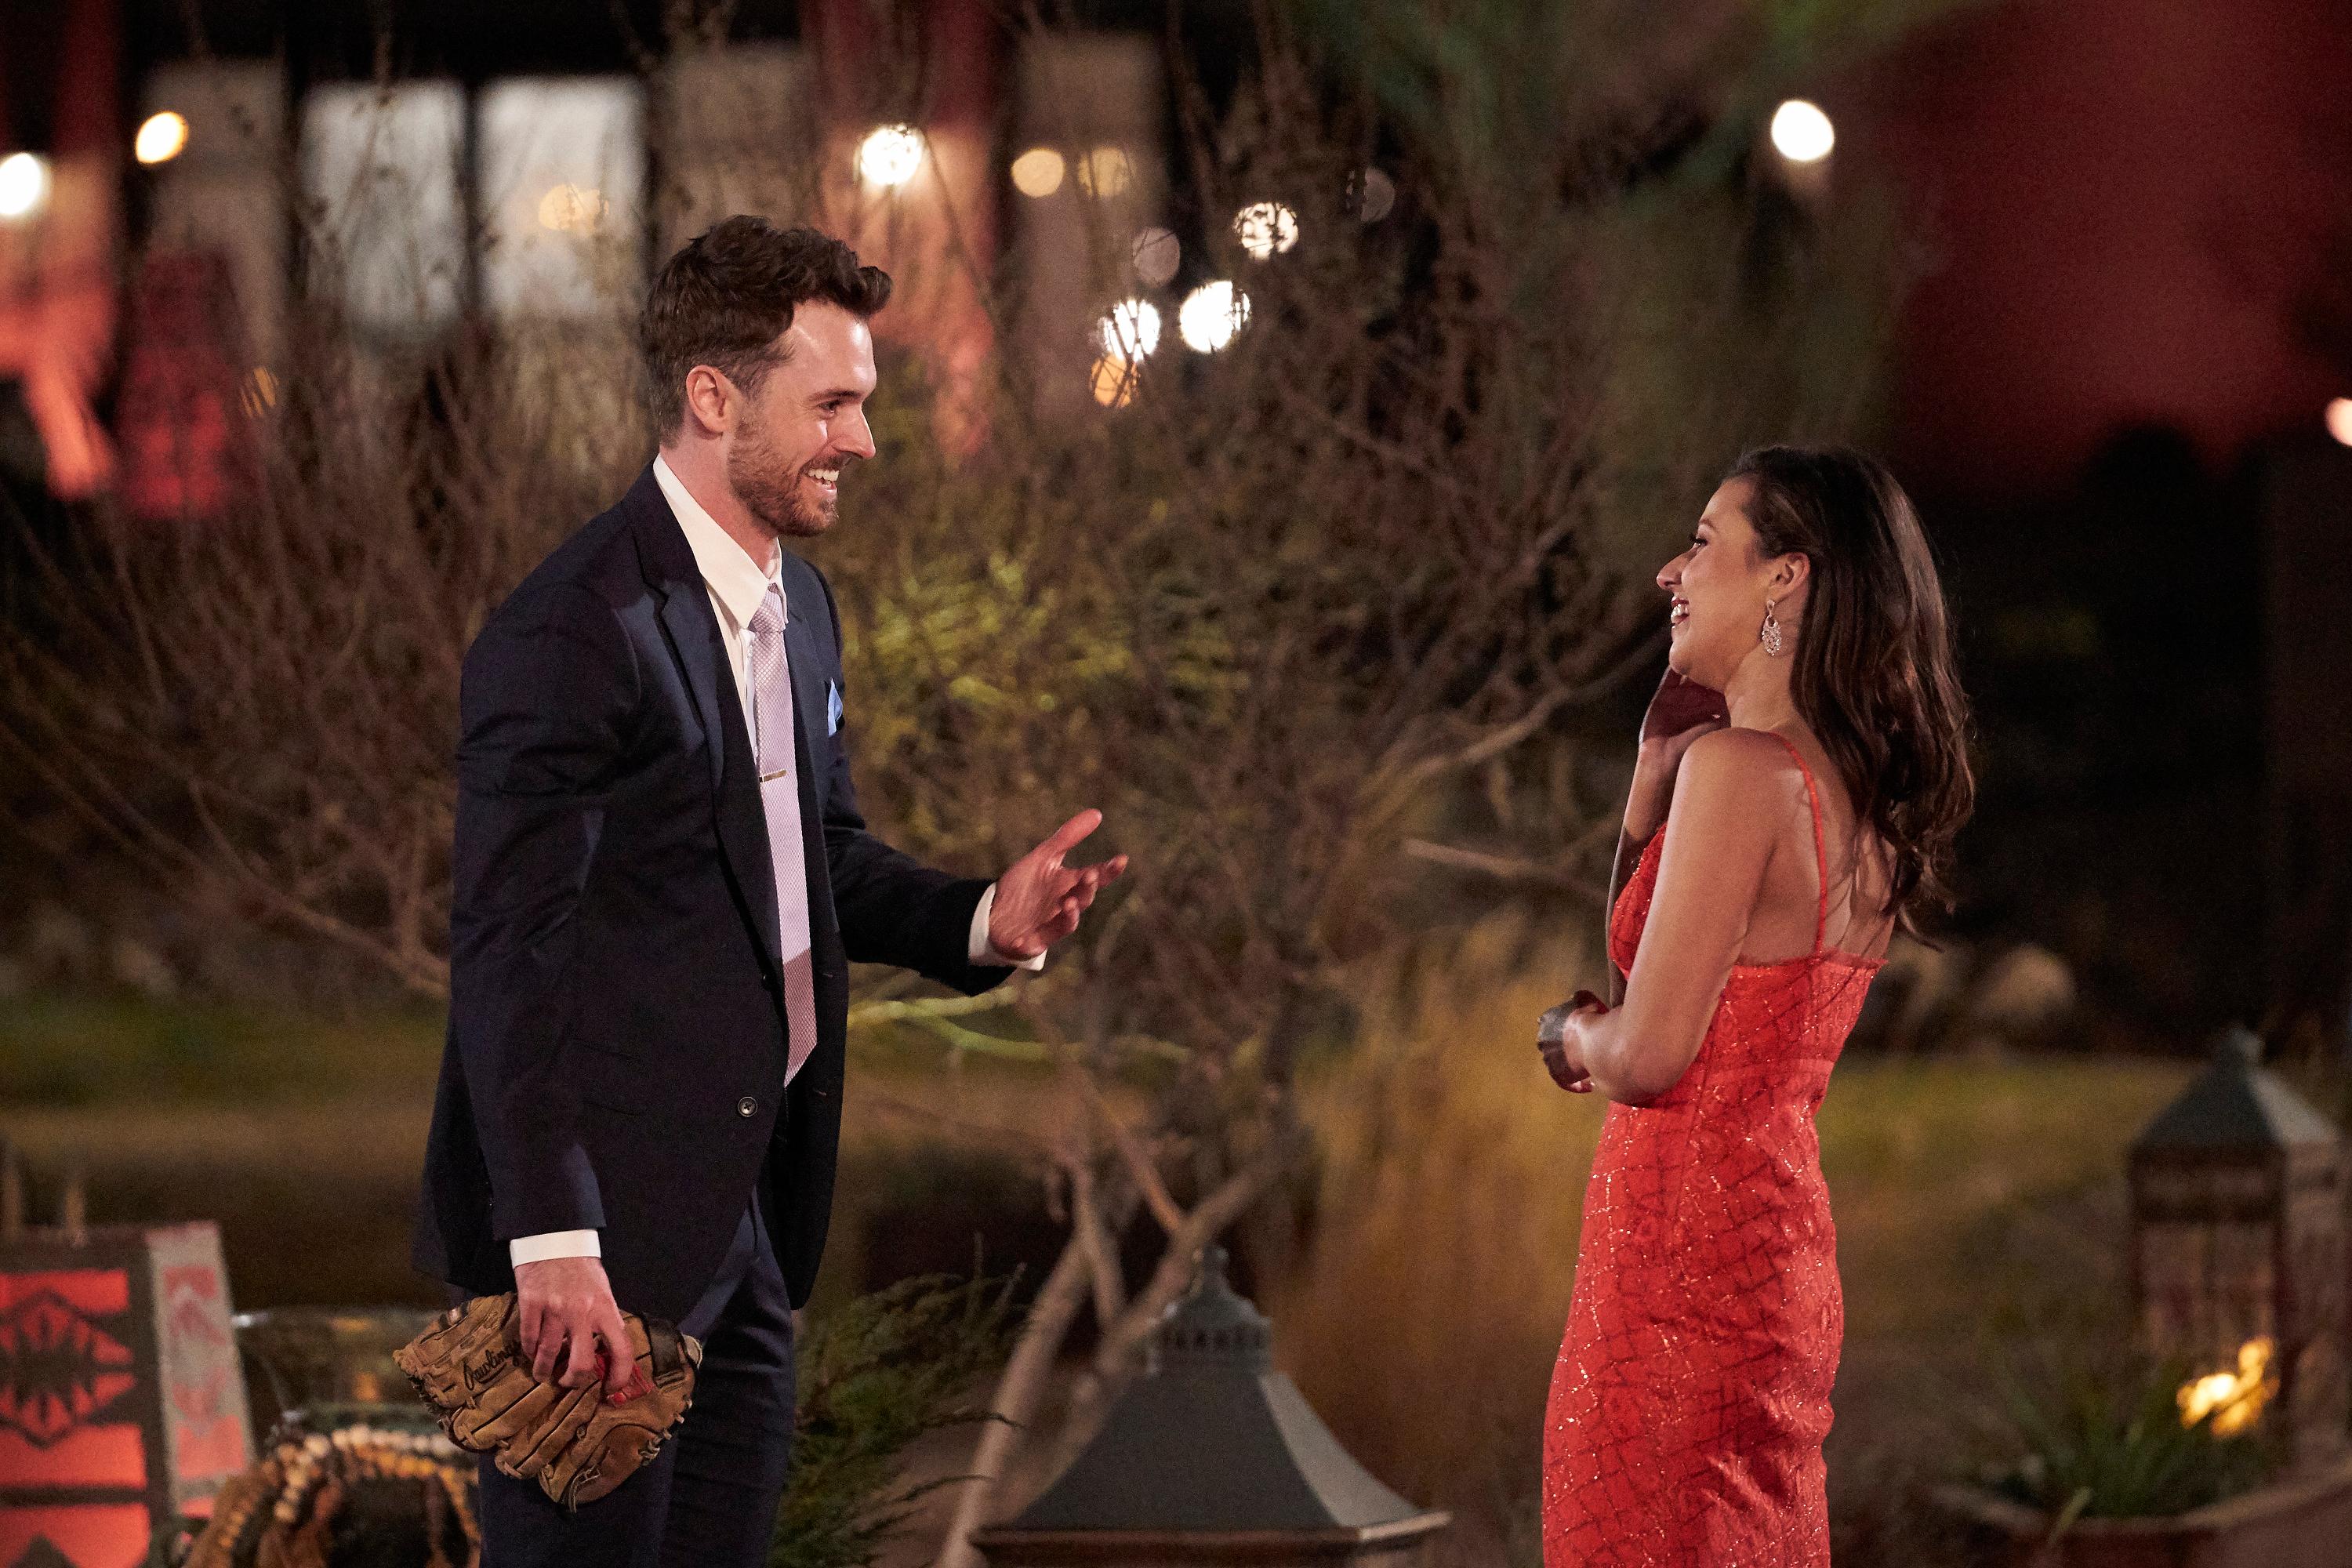 Conor and Katie in 'The Bachelorette'